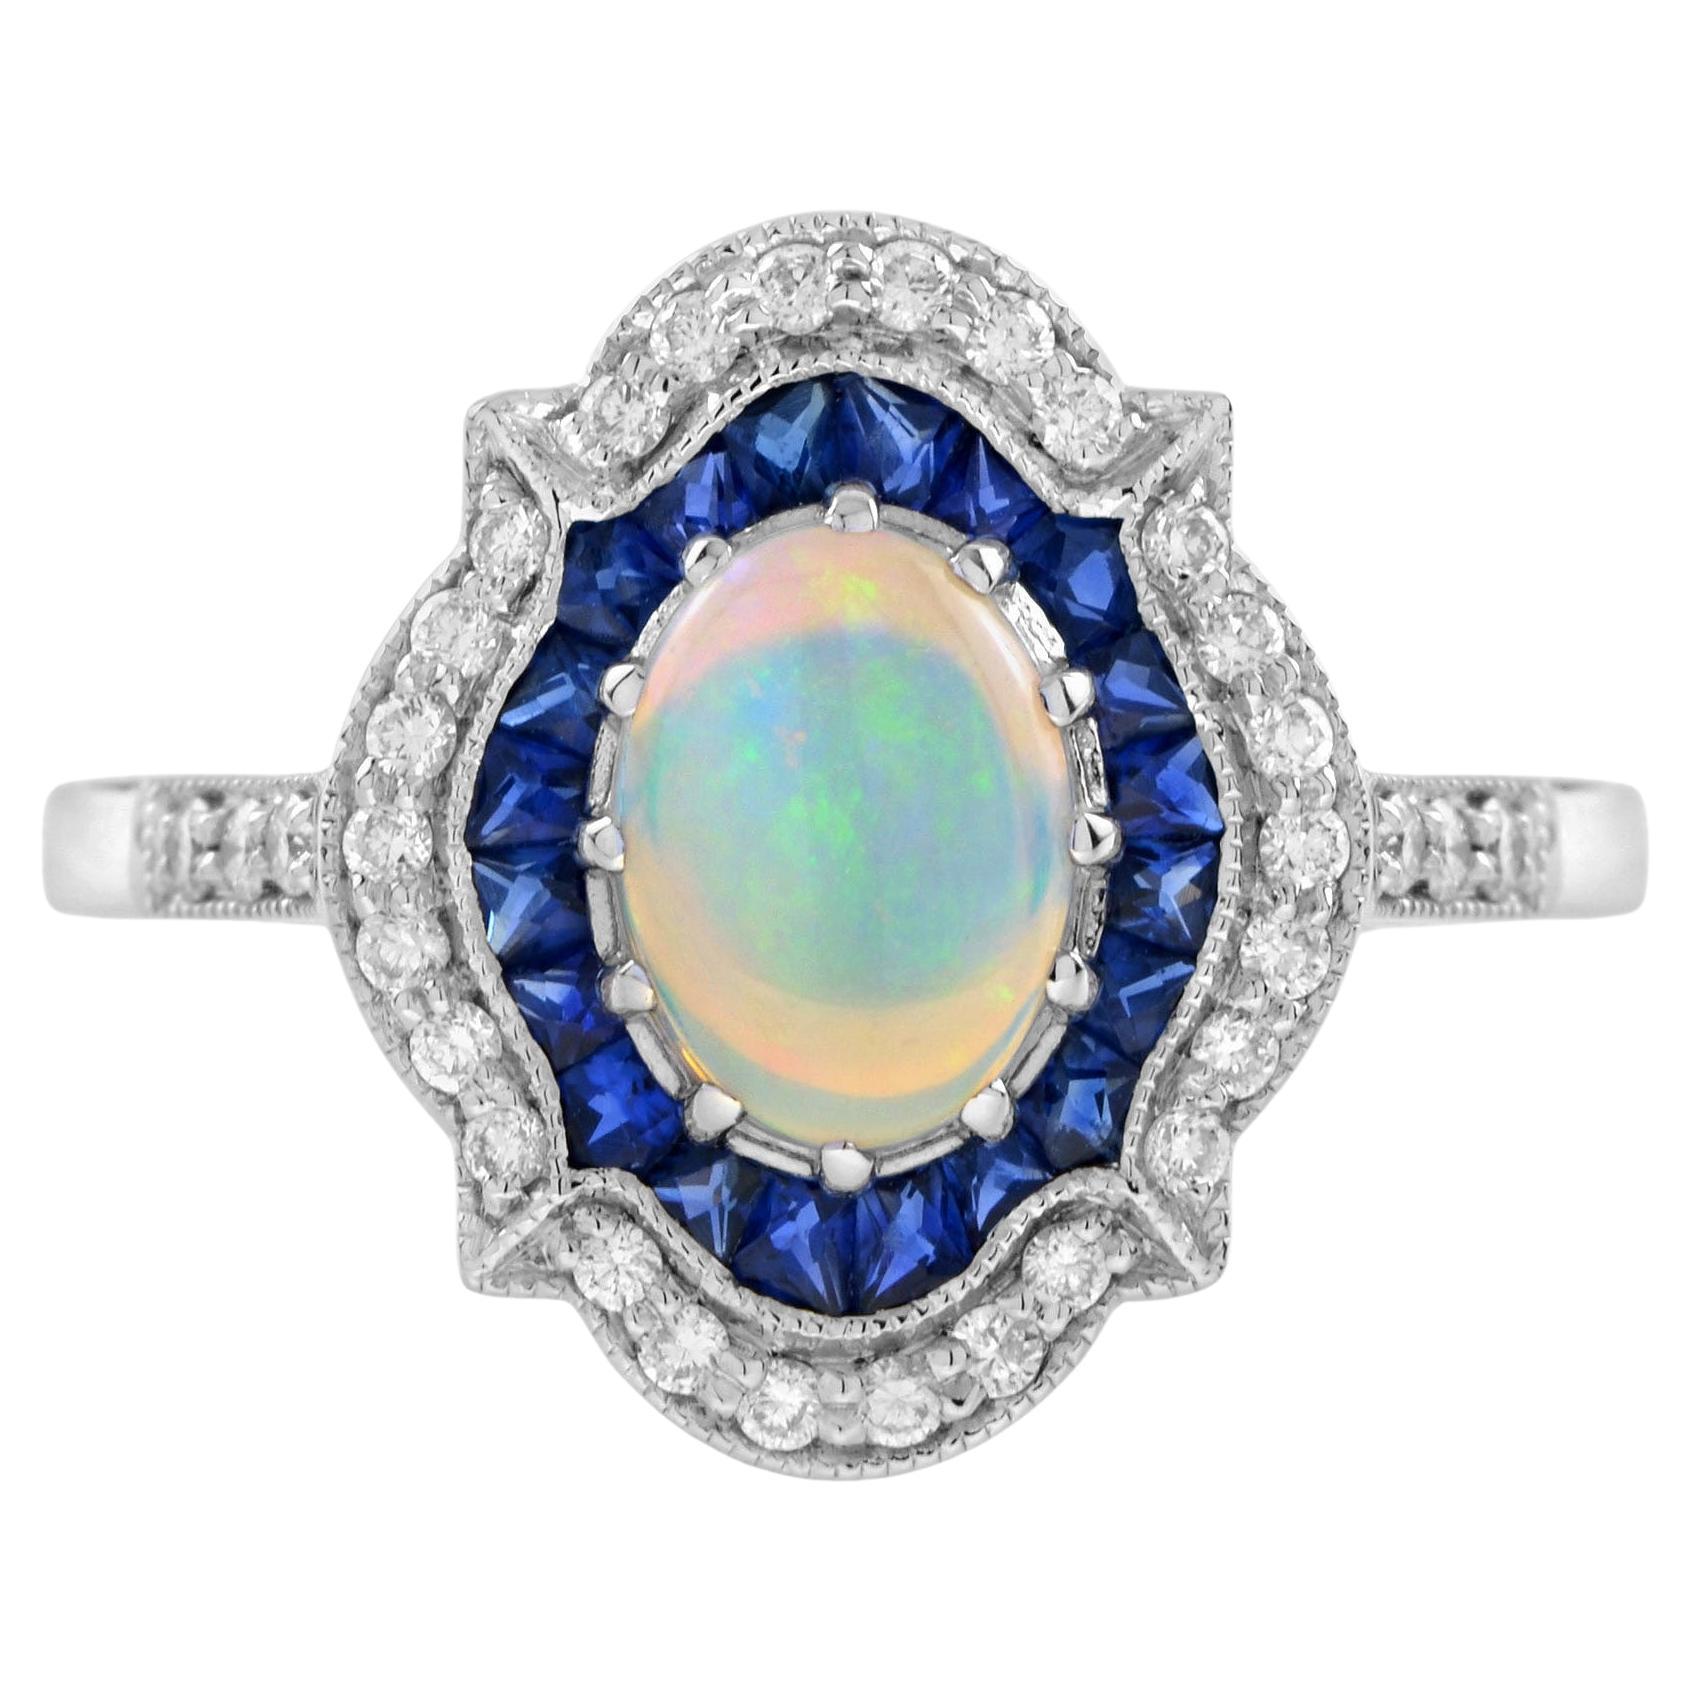 Oval Opal with Sapphire Diamond Art Deco Style Halo Ring in 14K White Gold